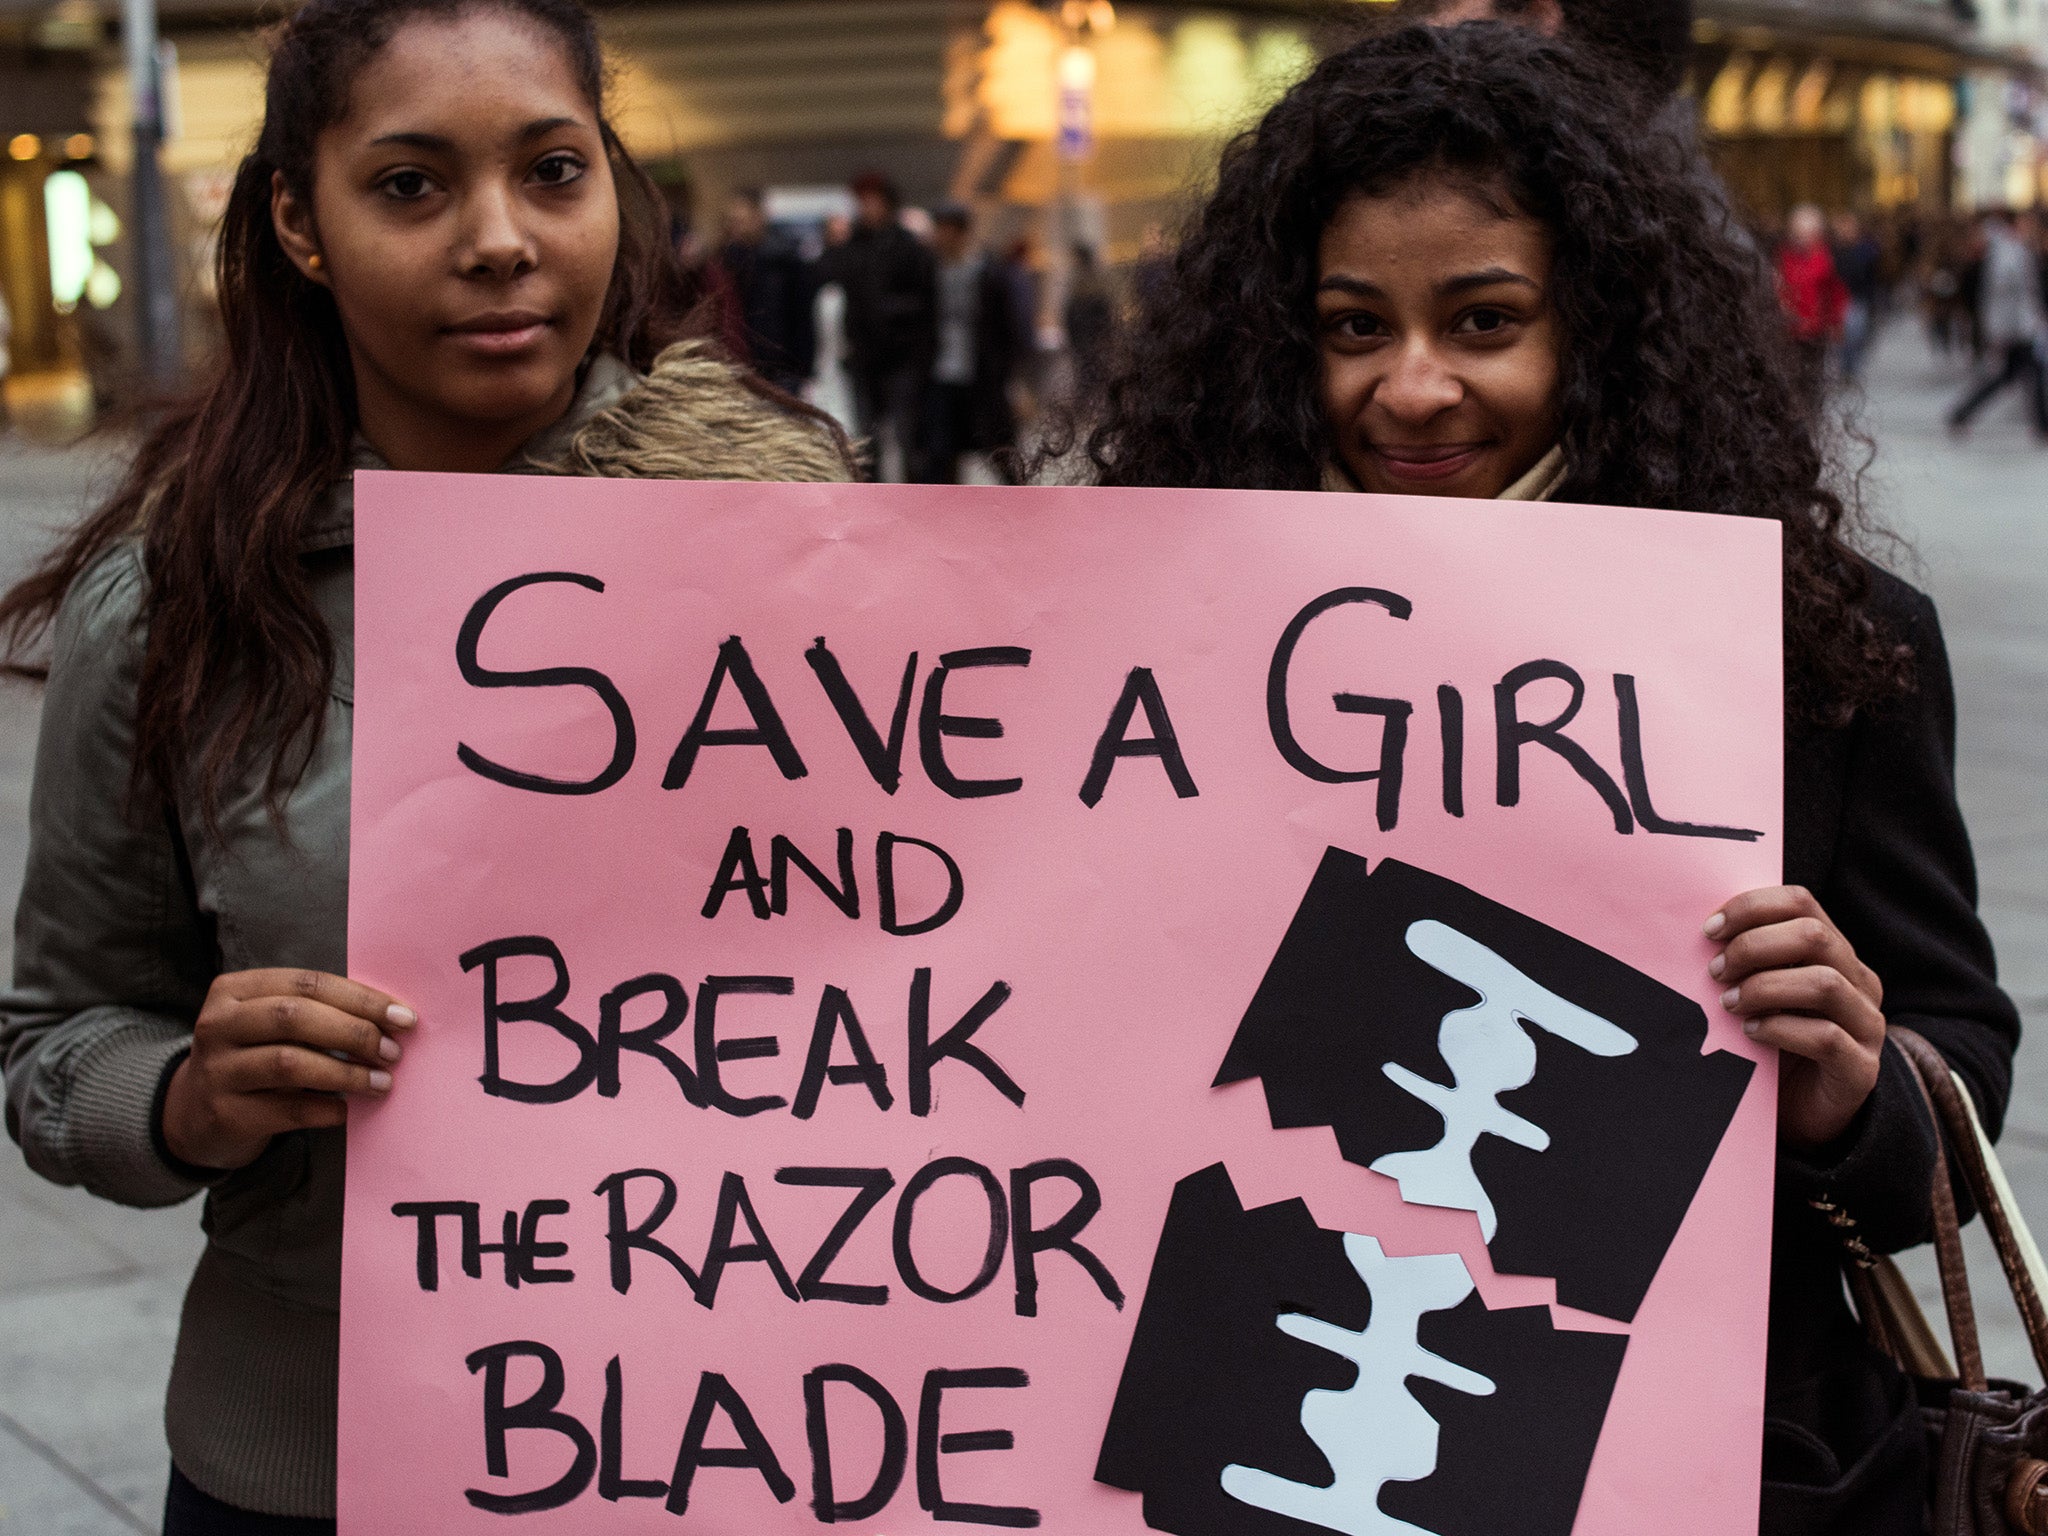 FGM has been illegal in Britain since 1983 but there has never been a prosecution